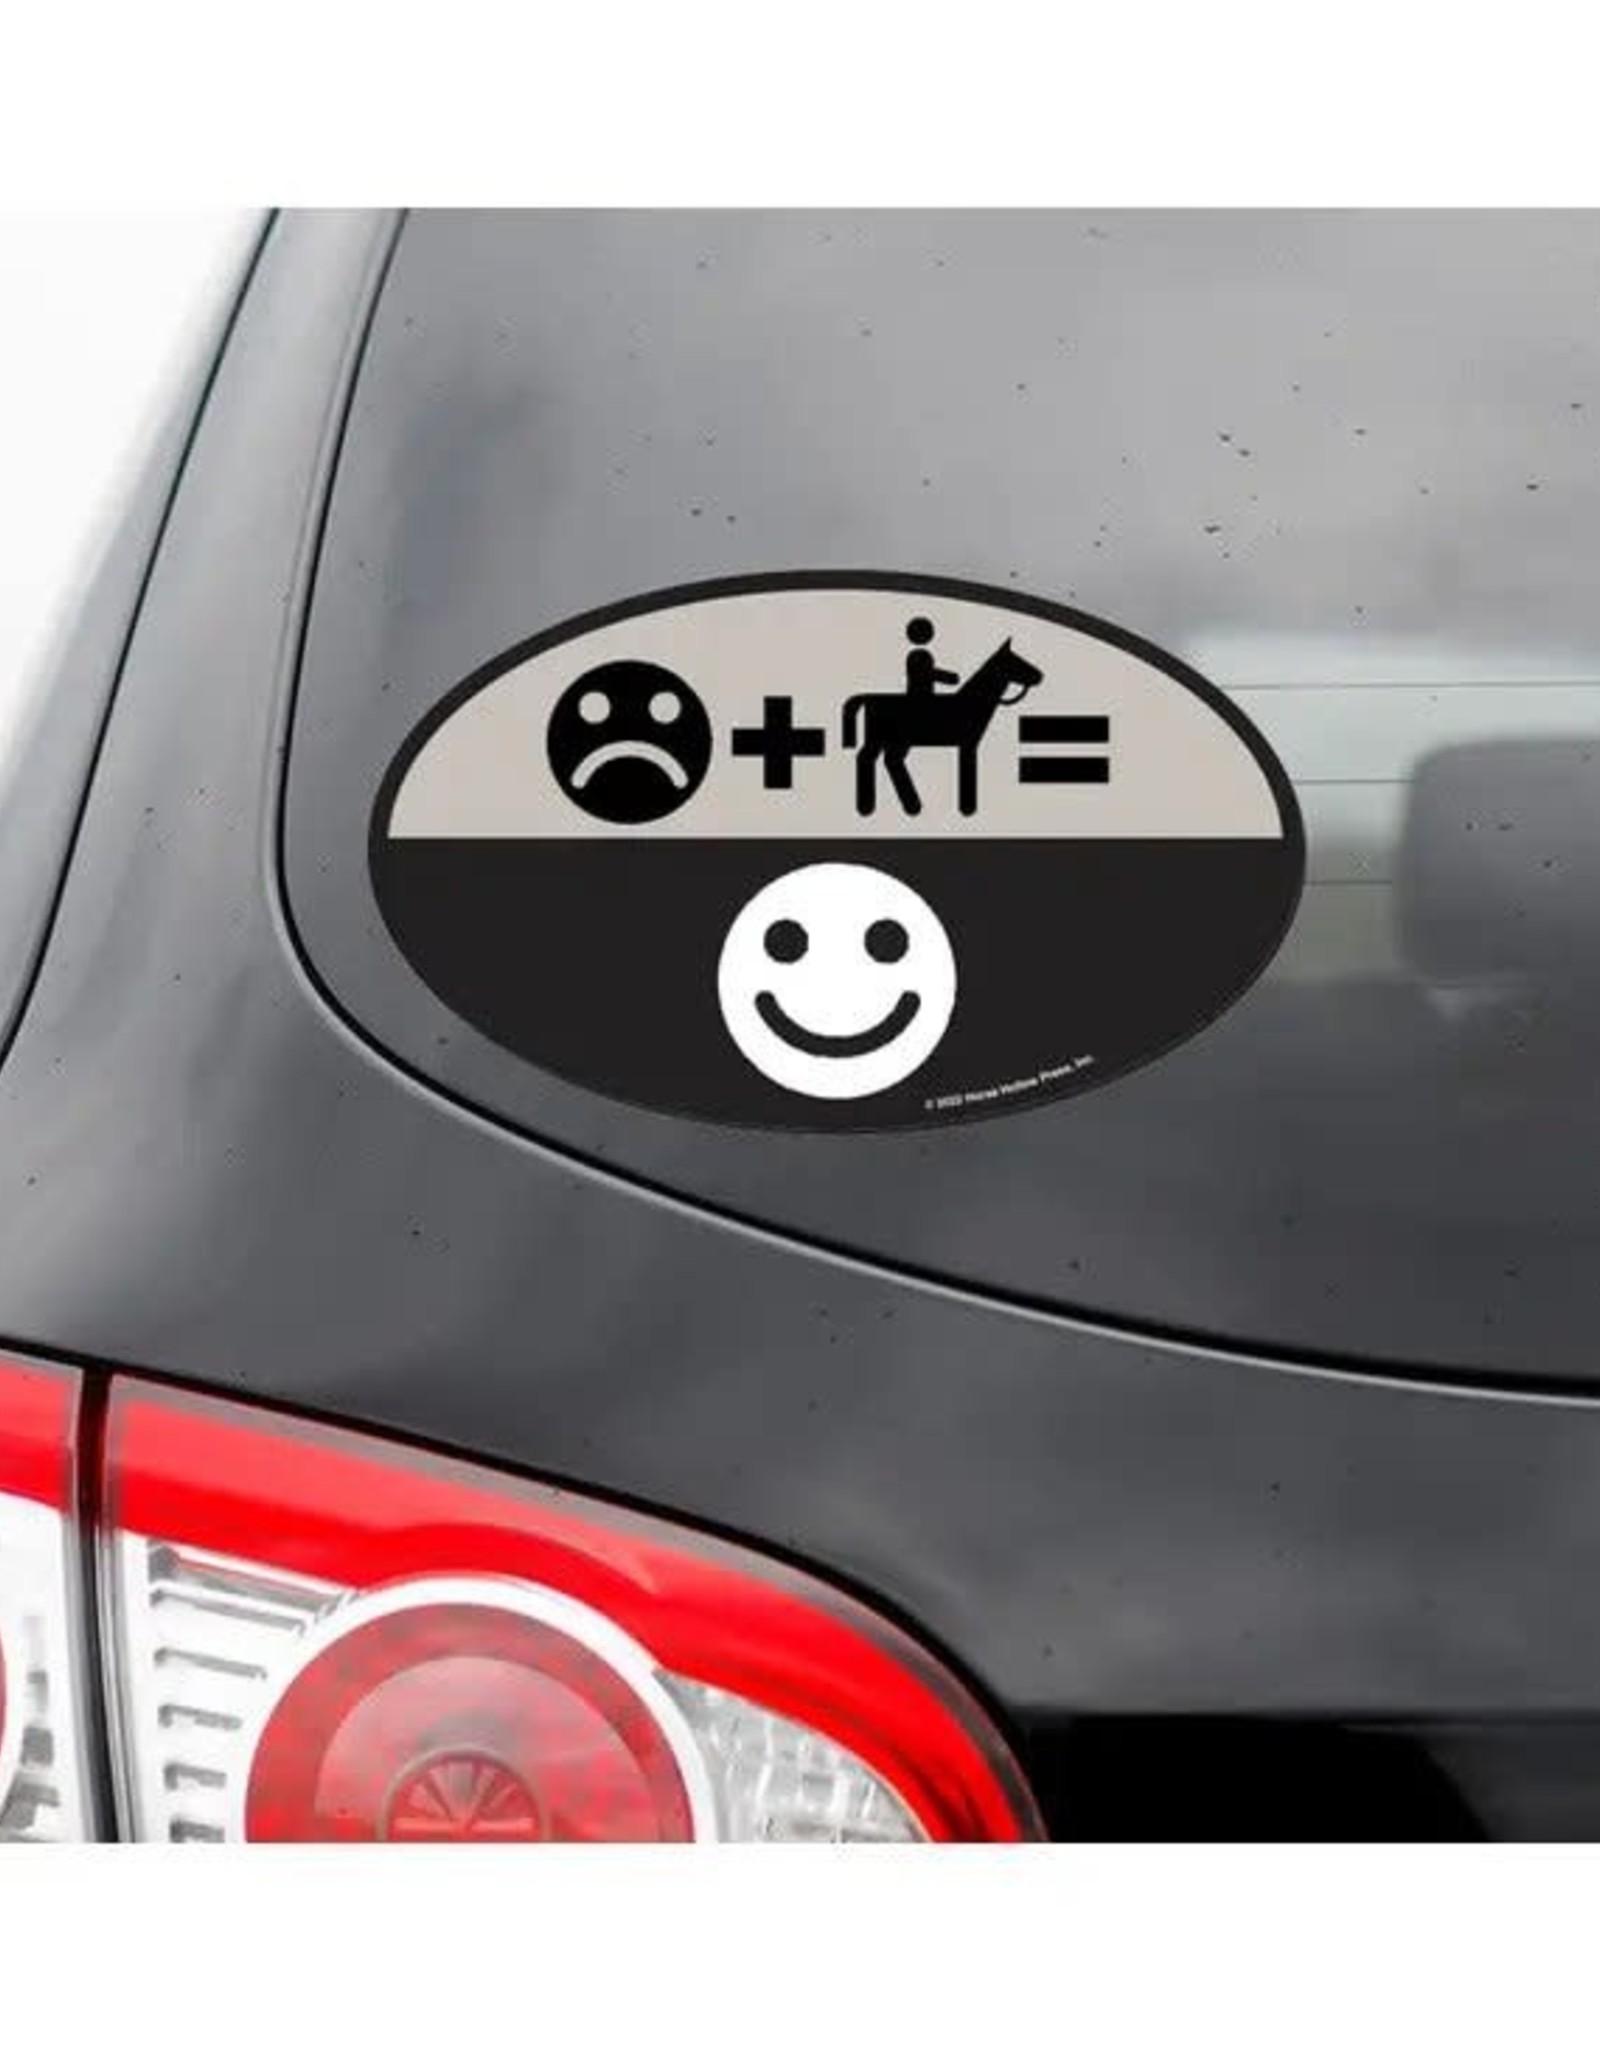 Horse Hollow Press Oval Equestrian Horse Sticker: Frown + Ride = Smile